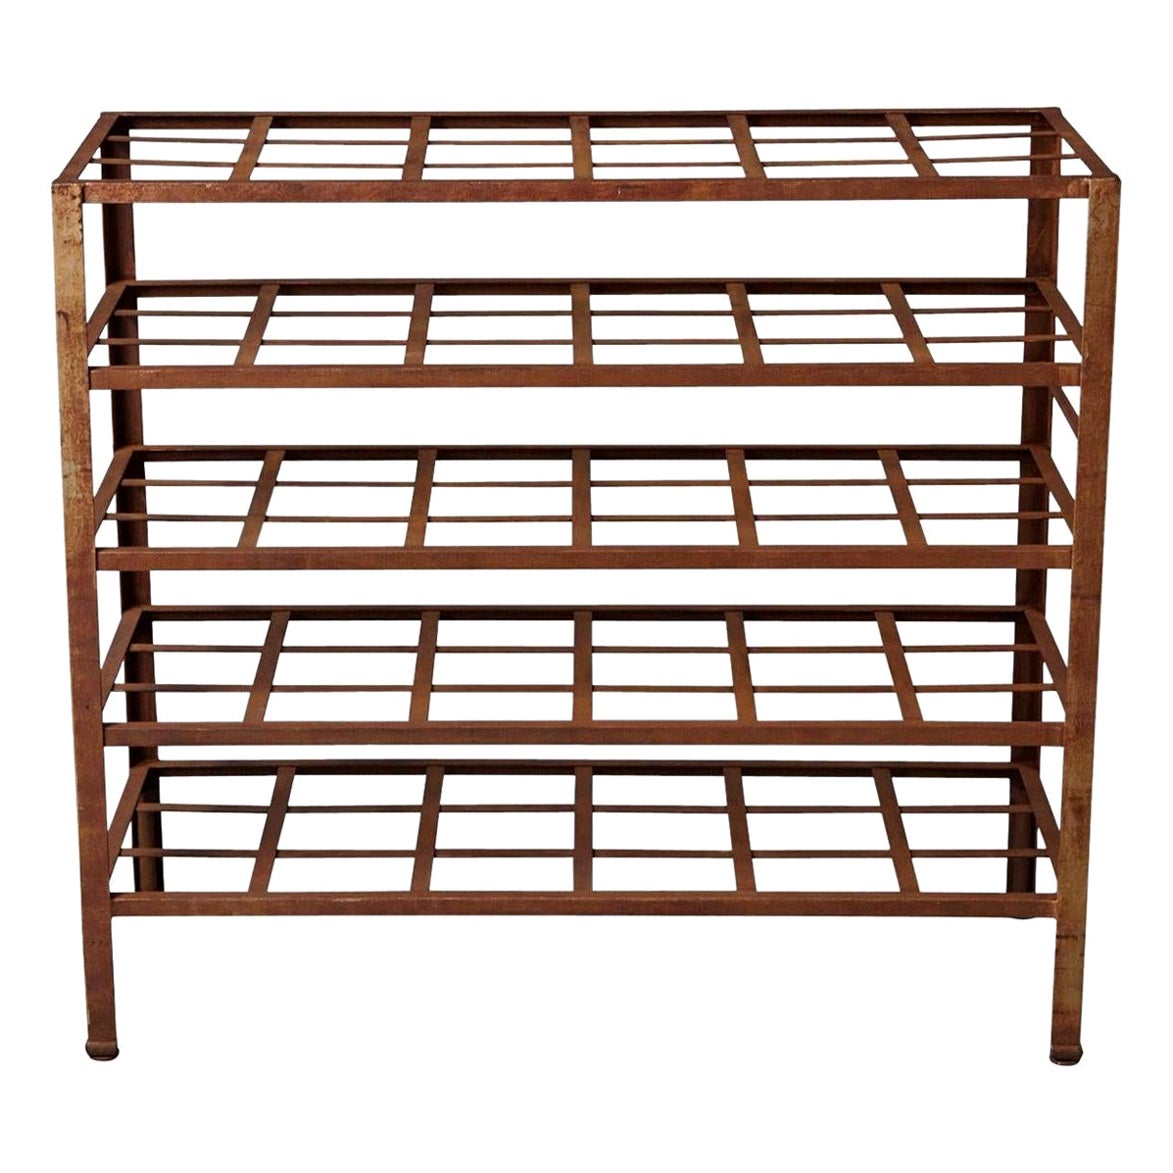 Industrial 5 Tier Shelf with Grid Shelves for Books or Usage as Seedling Planter